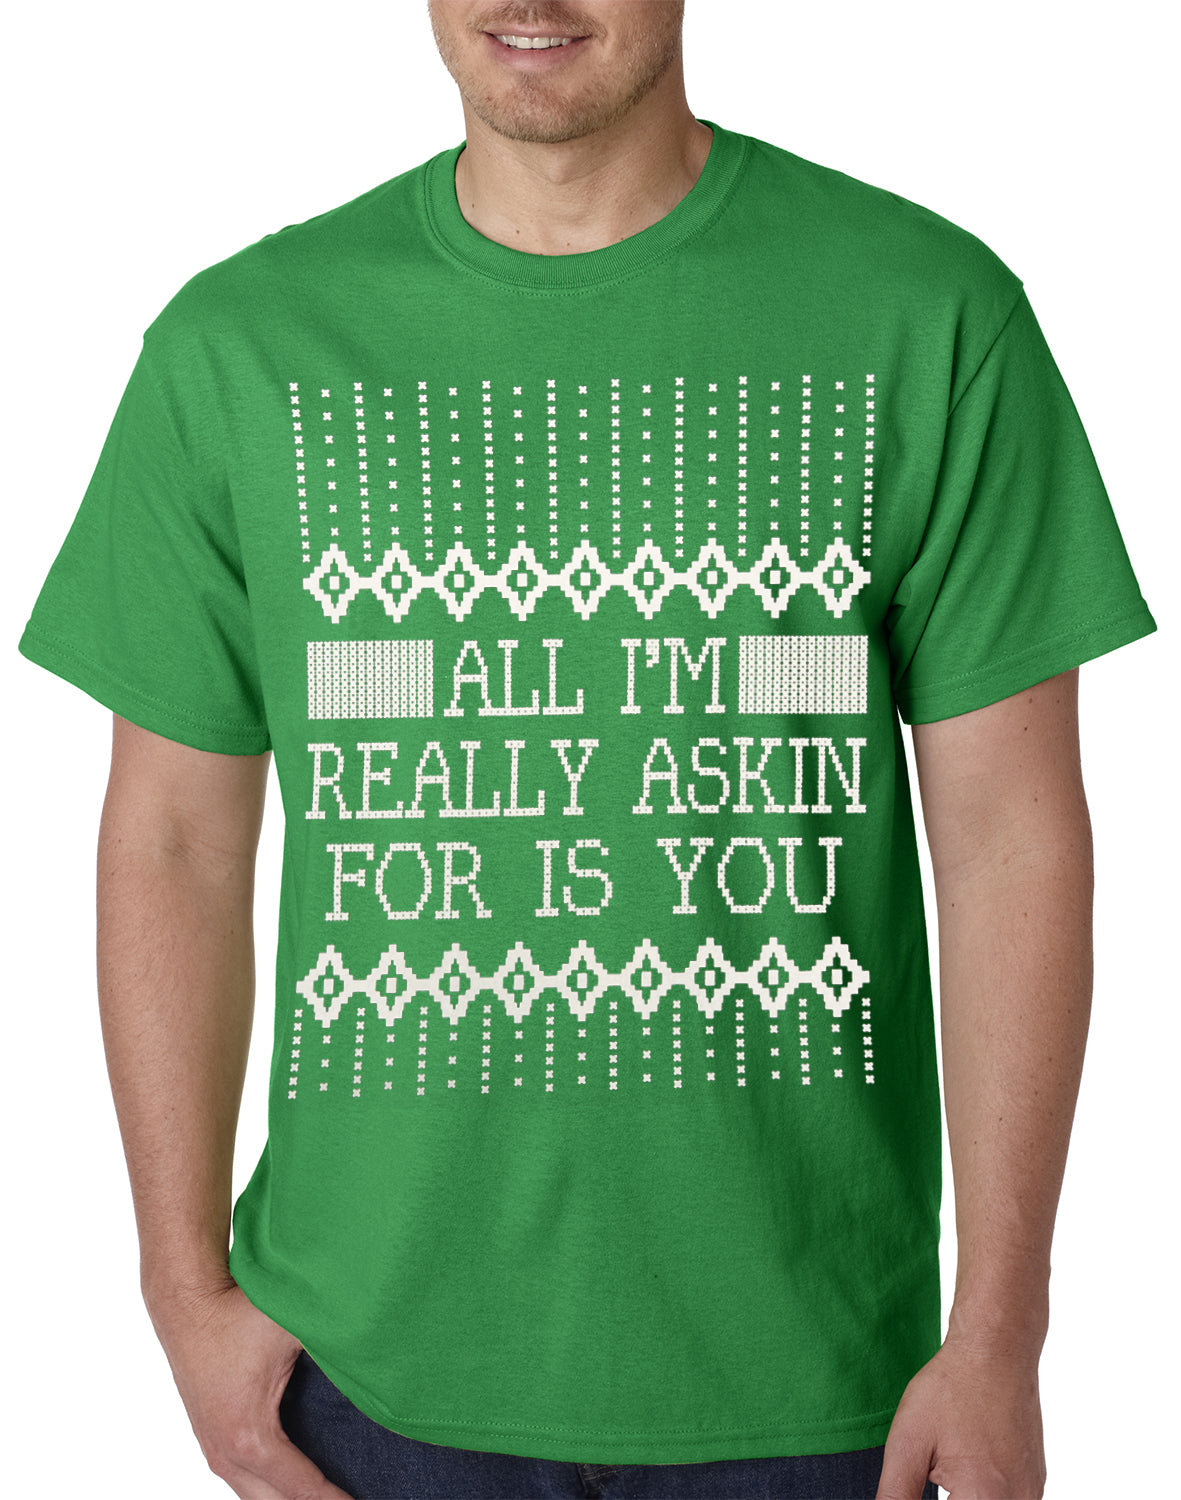 All I'm Asking For is You Mens T-shirt